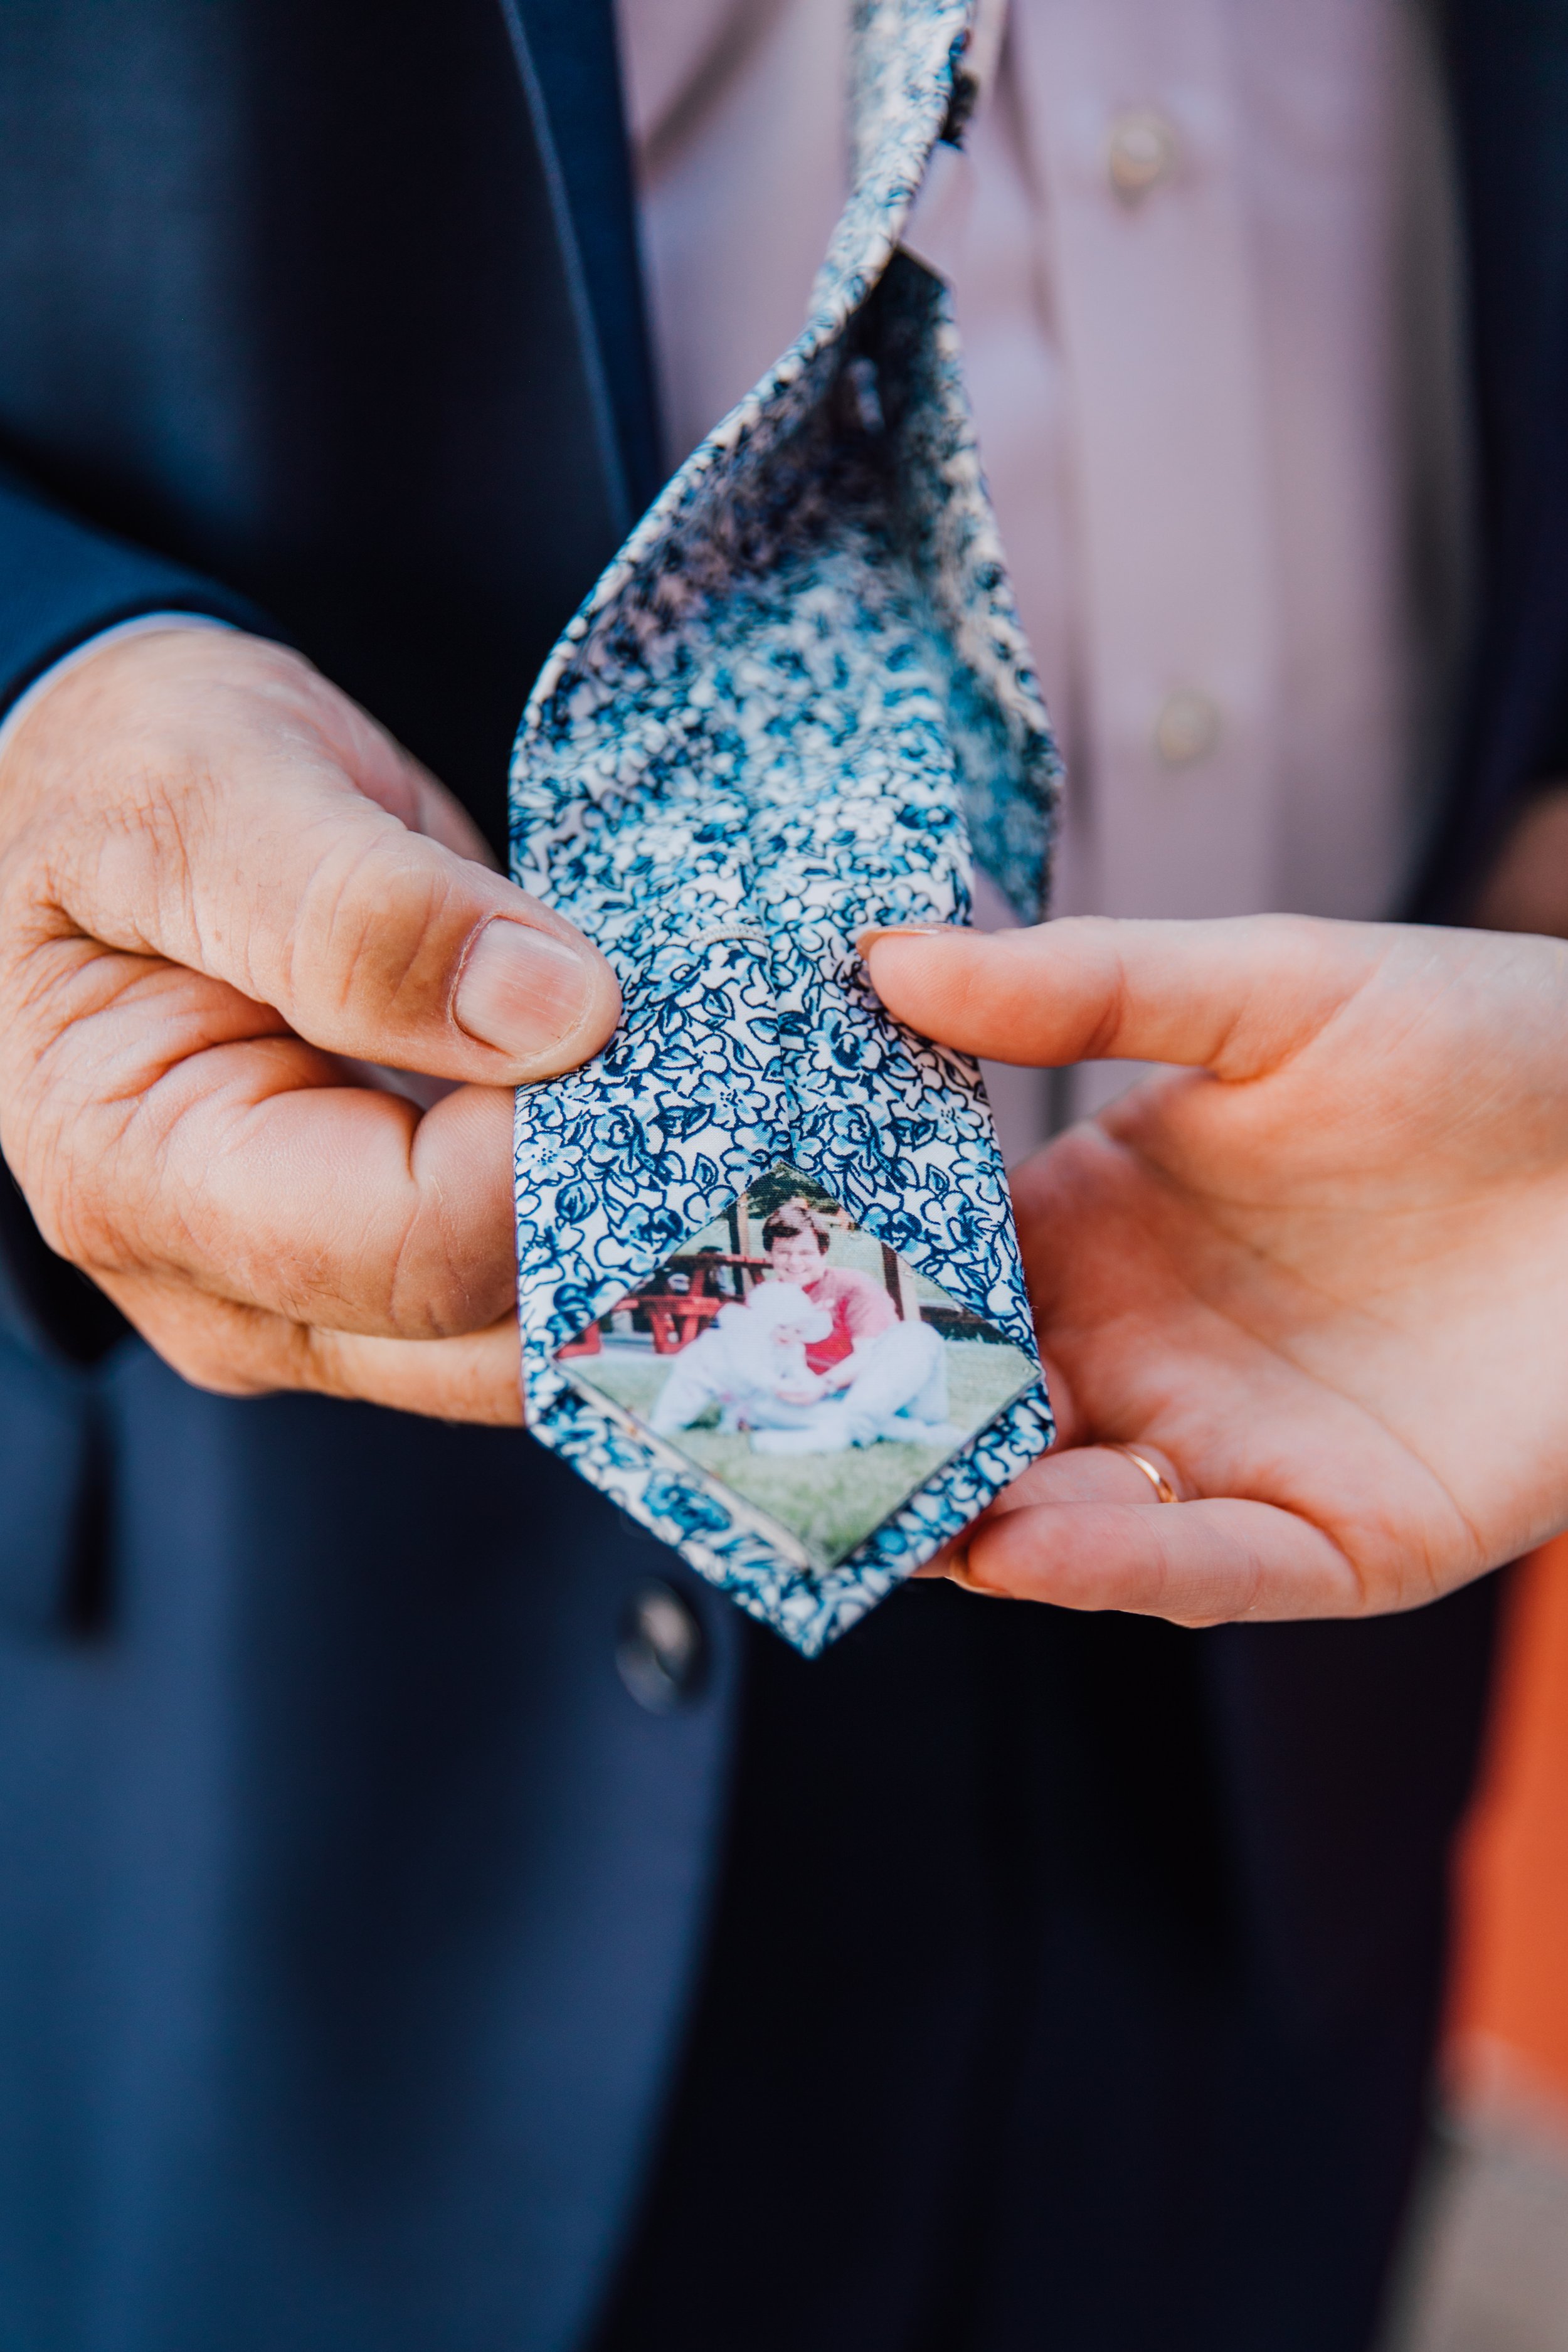  The underside of the Father of the Bride’s tie features a photo of him and the Bride when she was young 